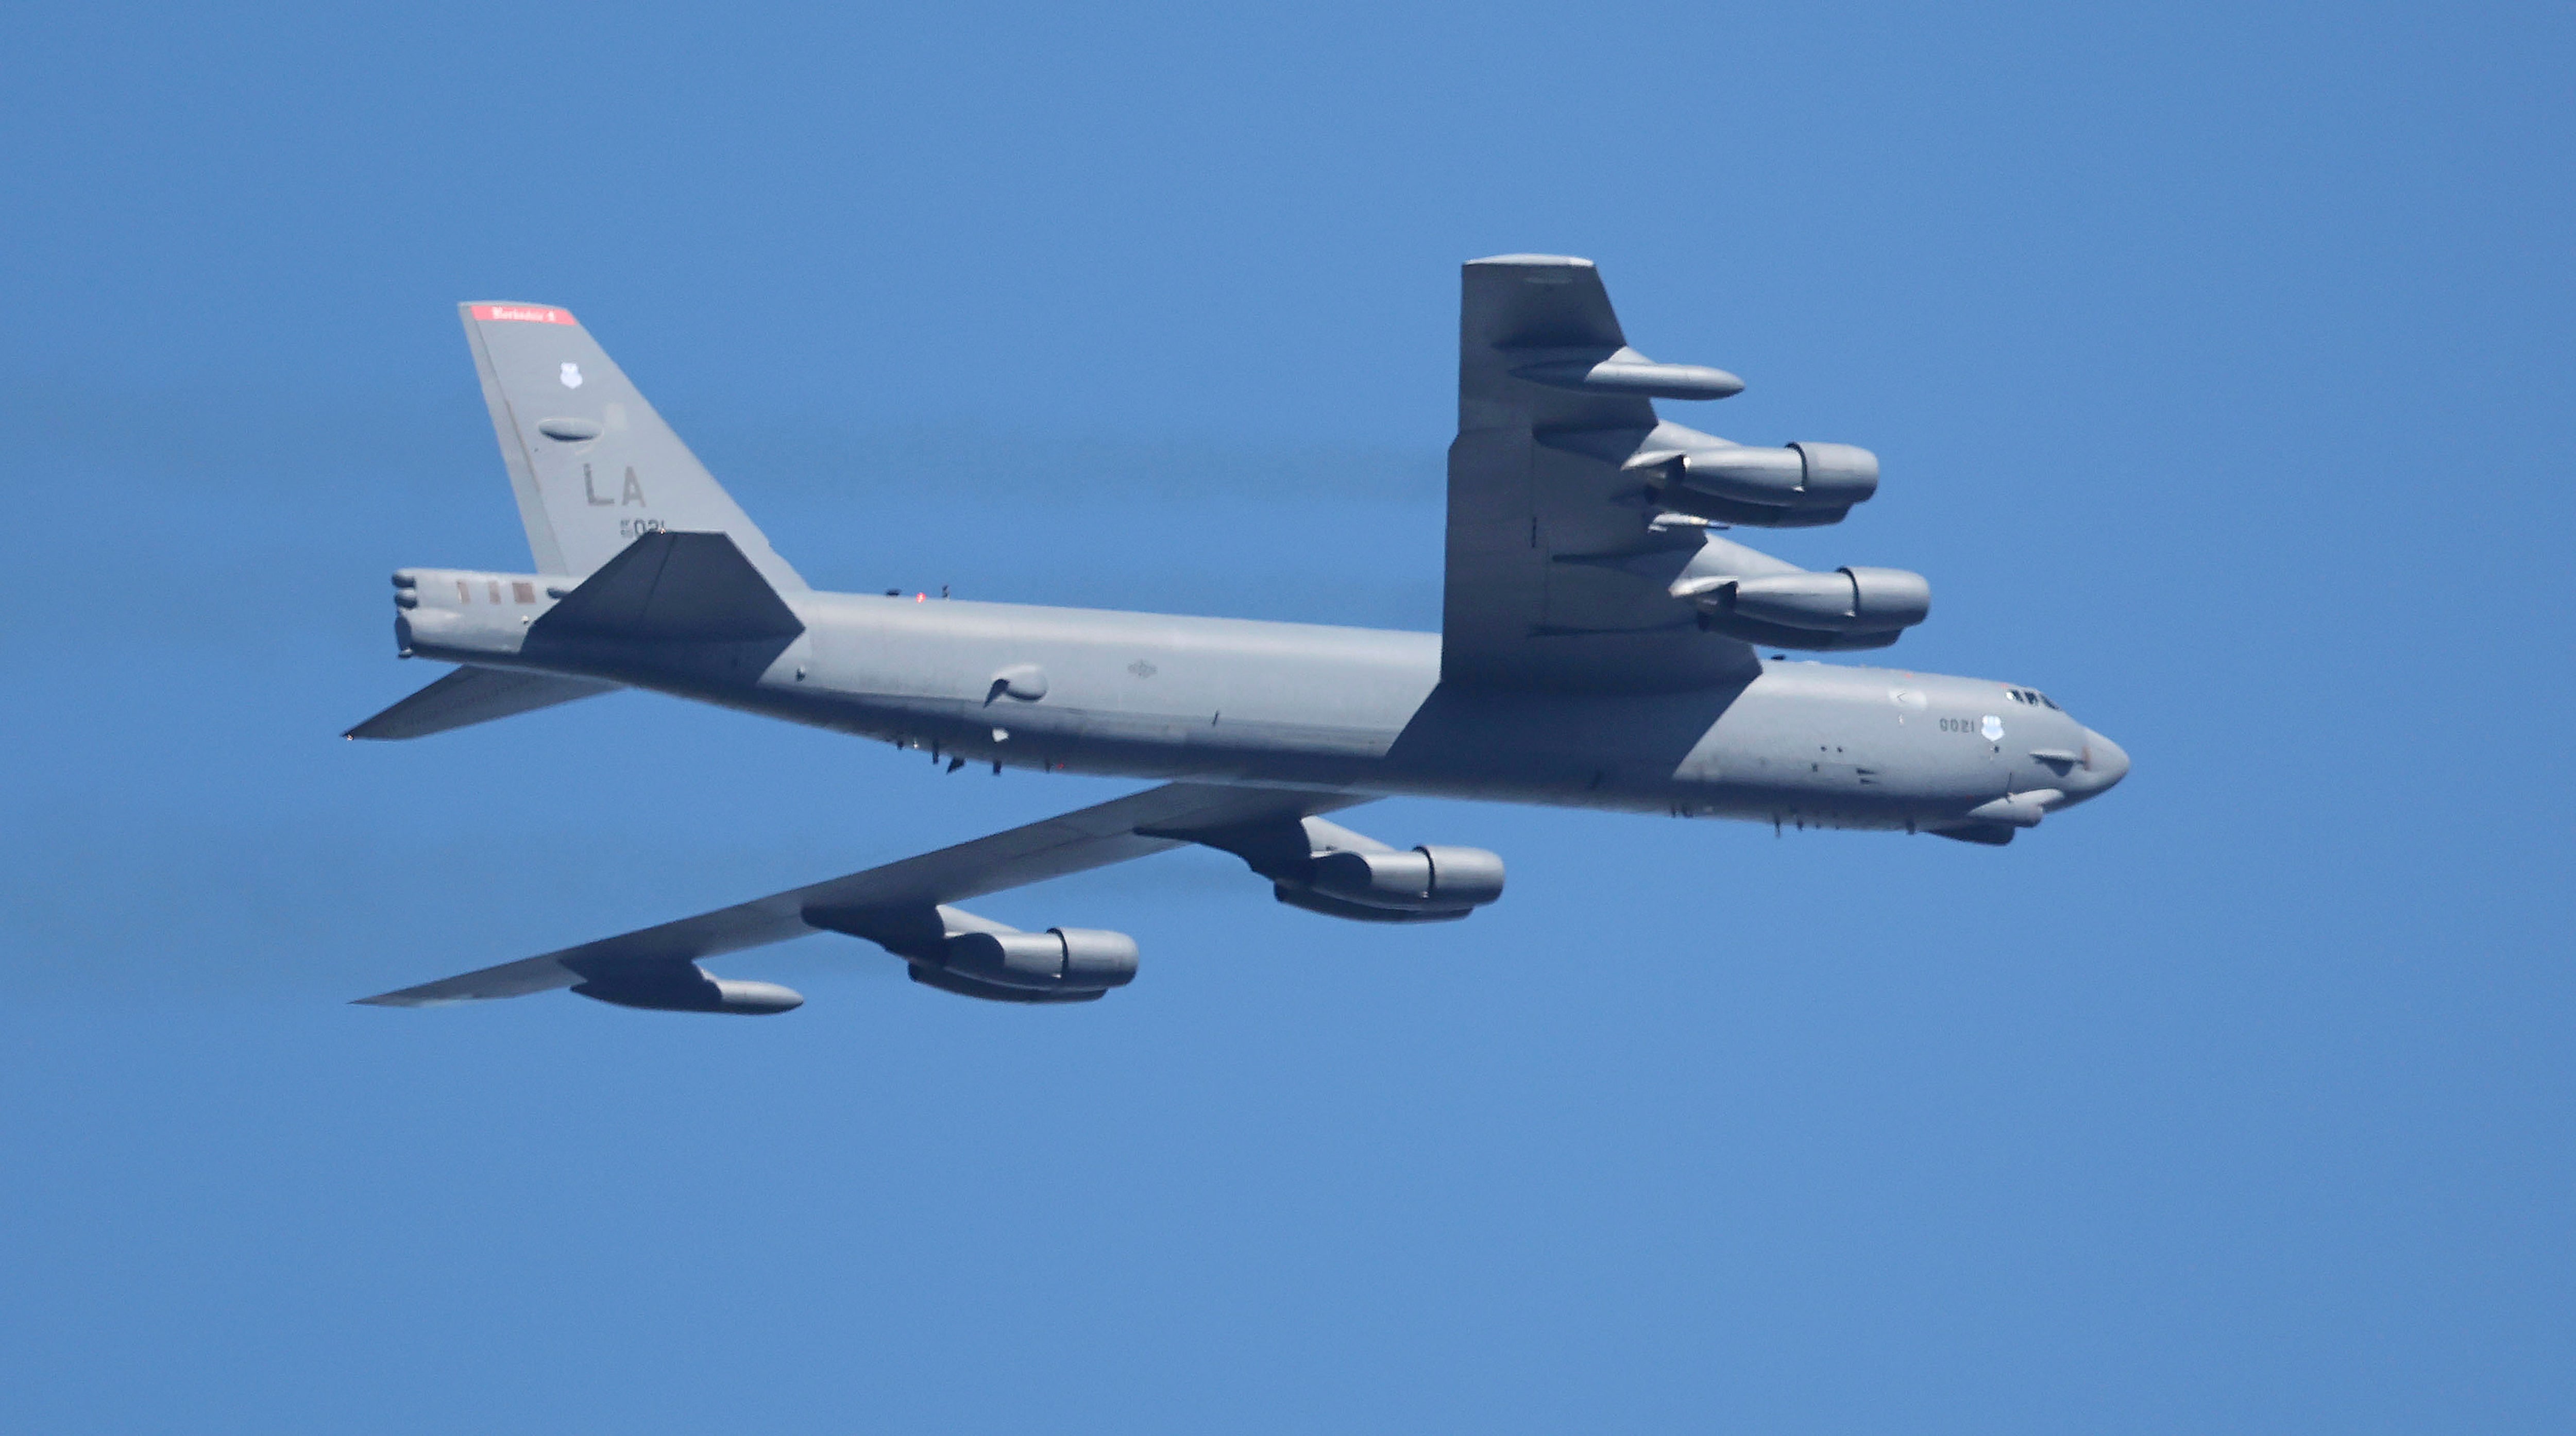 File: A US Air Force B-52 bomber flies during the Seoul International Aerospace and Defense Exhibition 2023